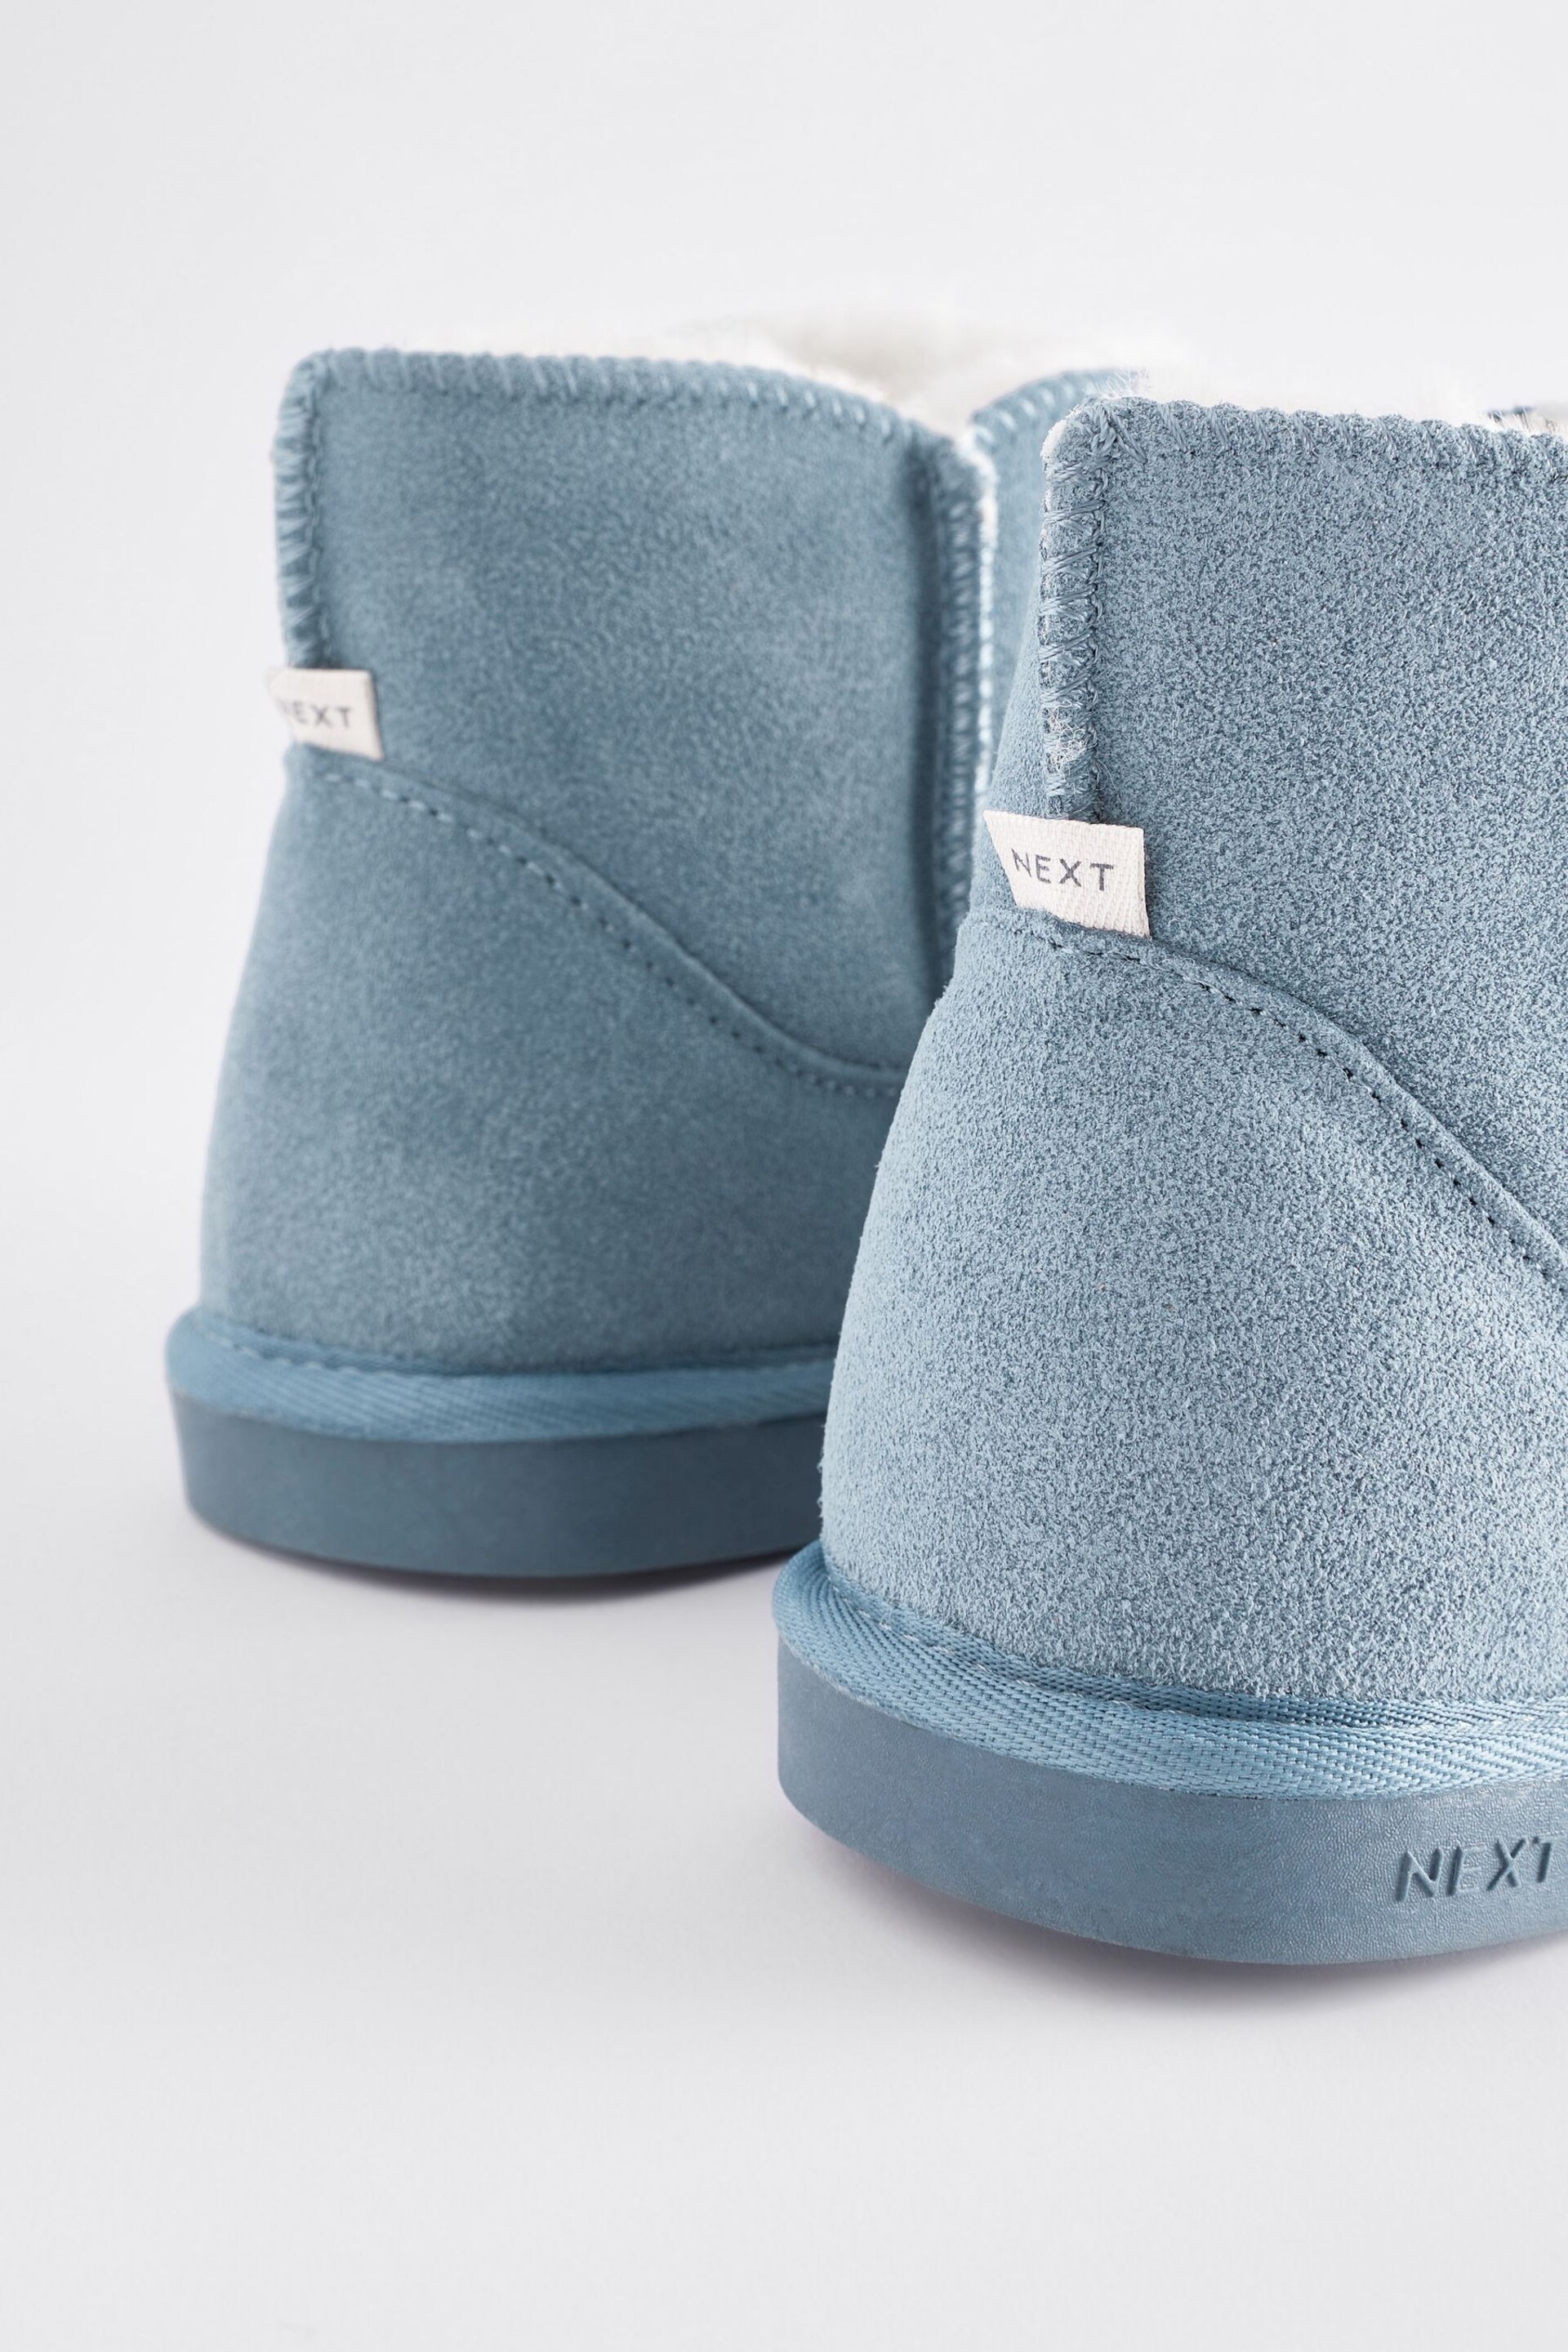 Blue Suede Boot Slippers - Image 4 of 7